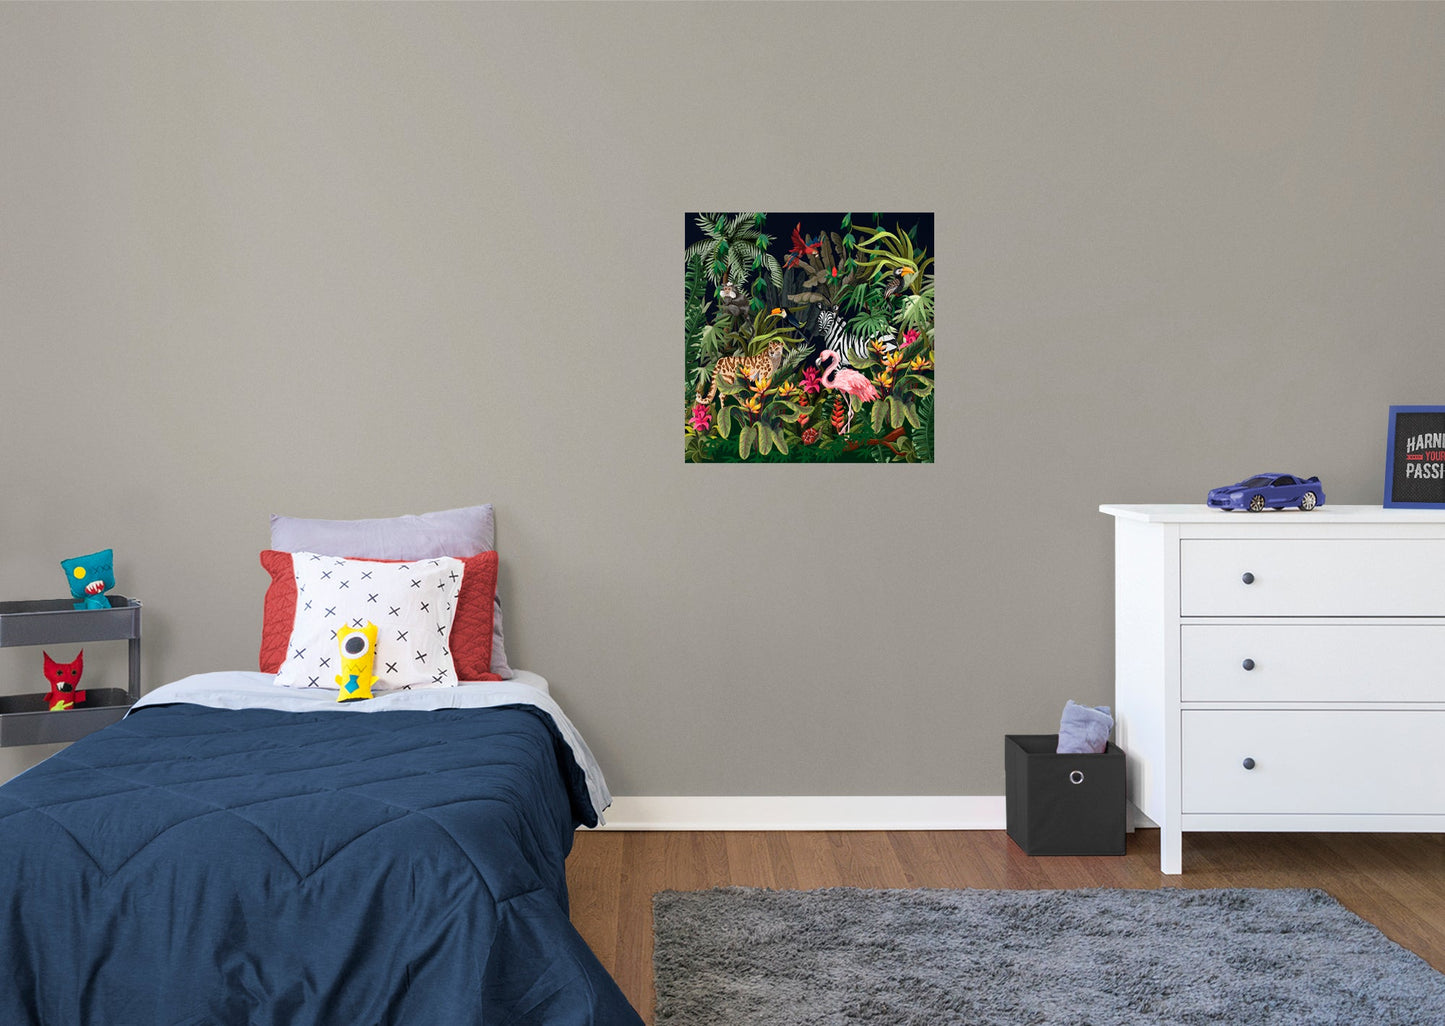 Jungle:  Jungle Beauty Mural        -   Removable Wall   Adhesive Decal